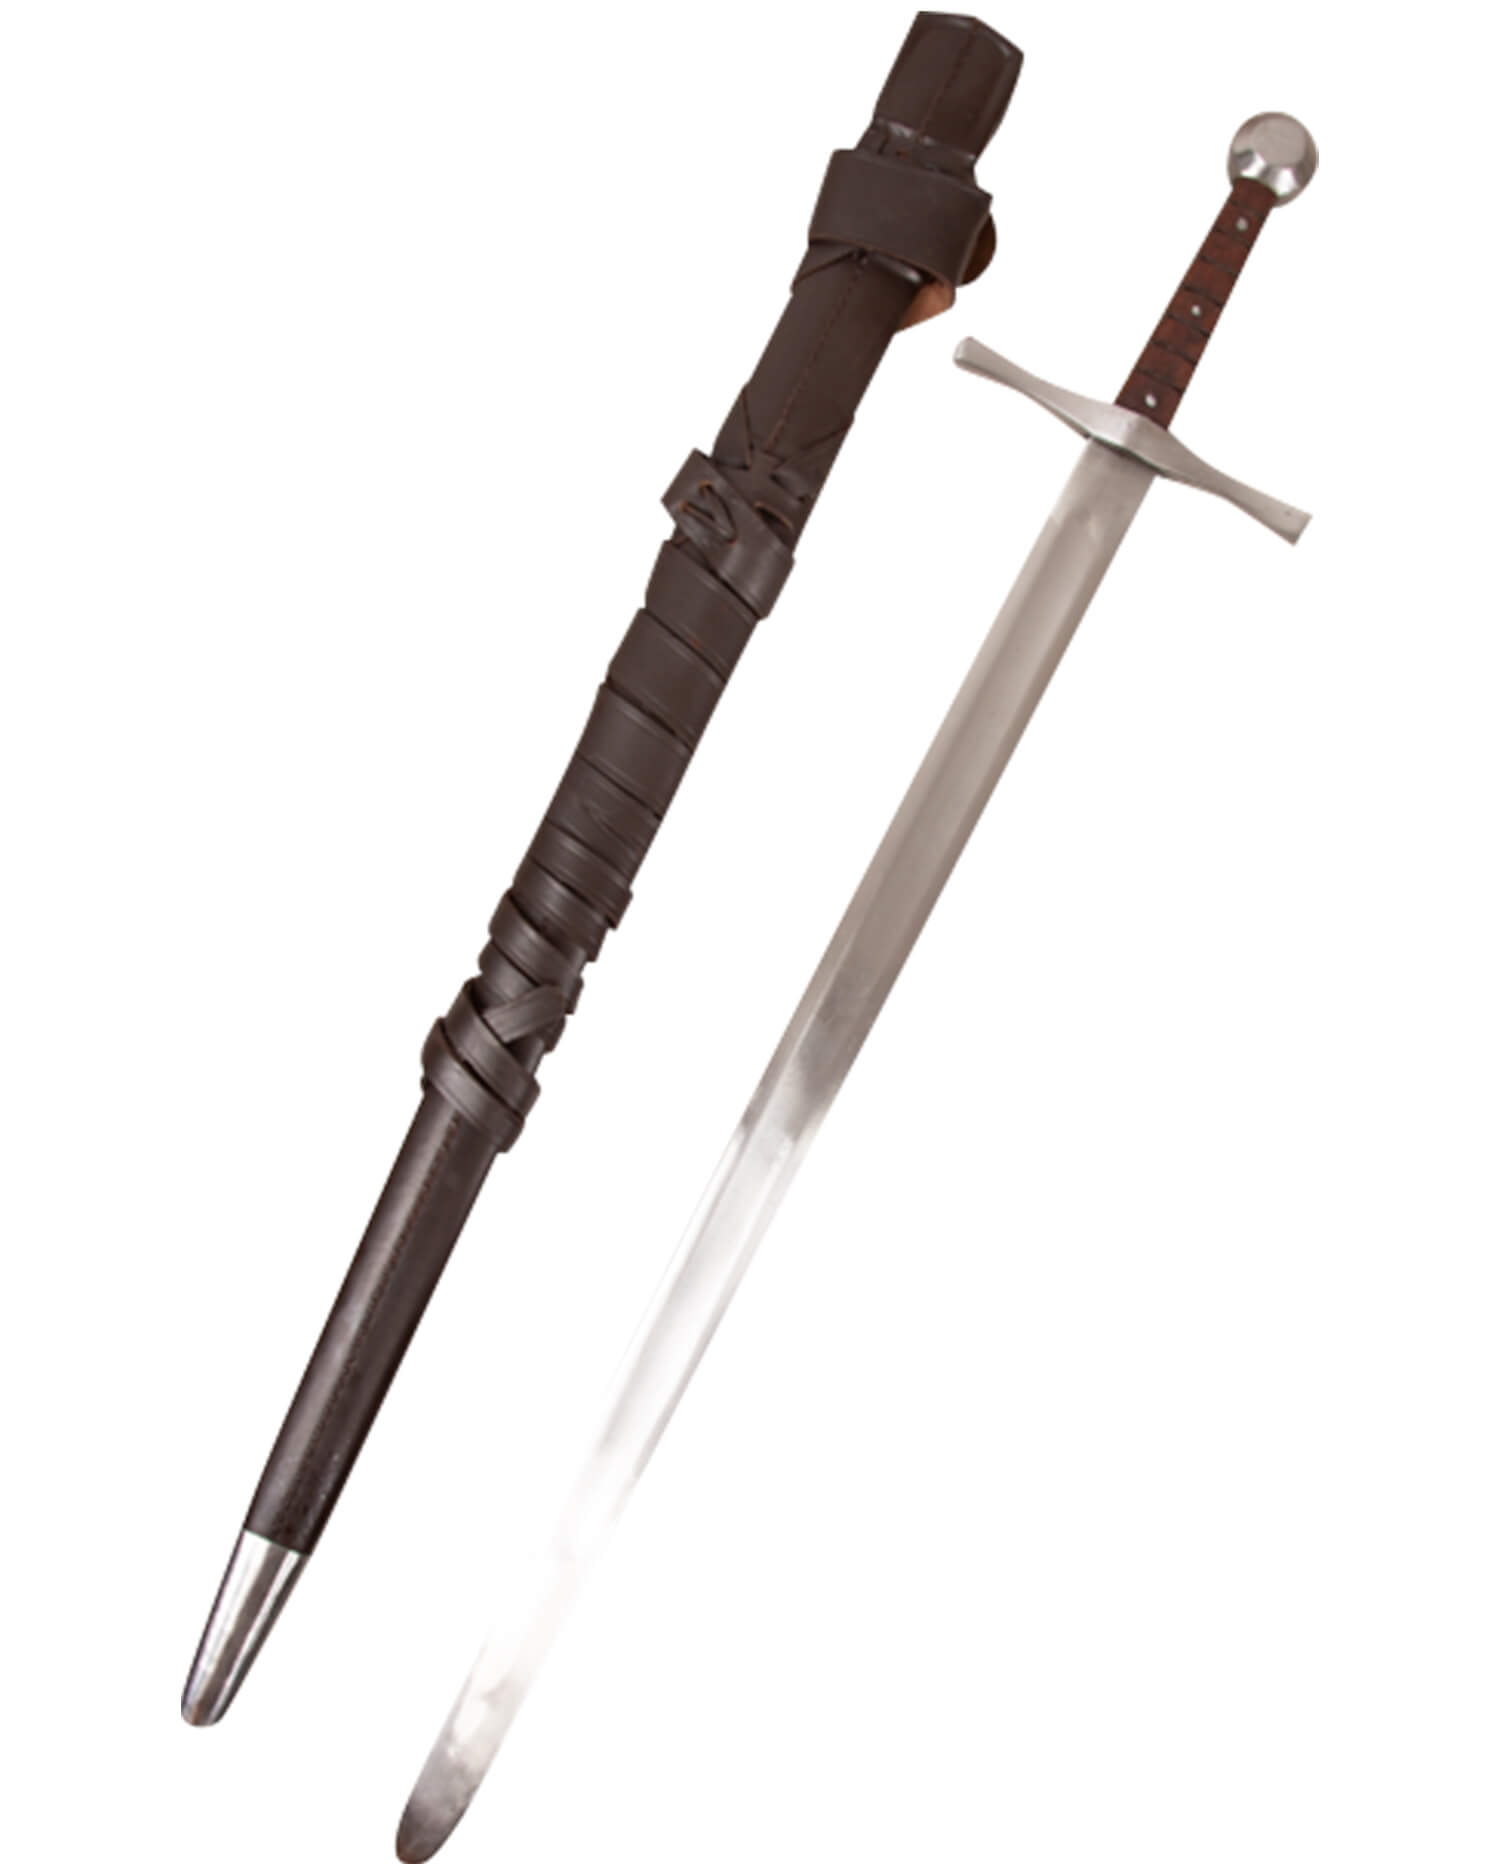 Oswald stage fight sword